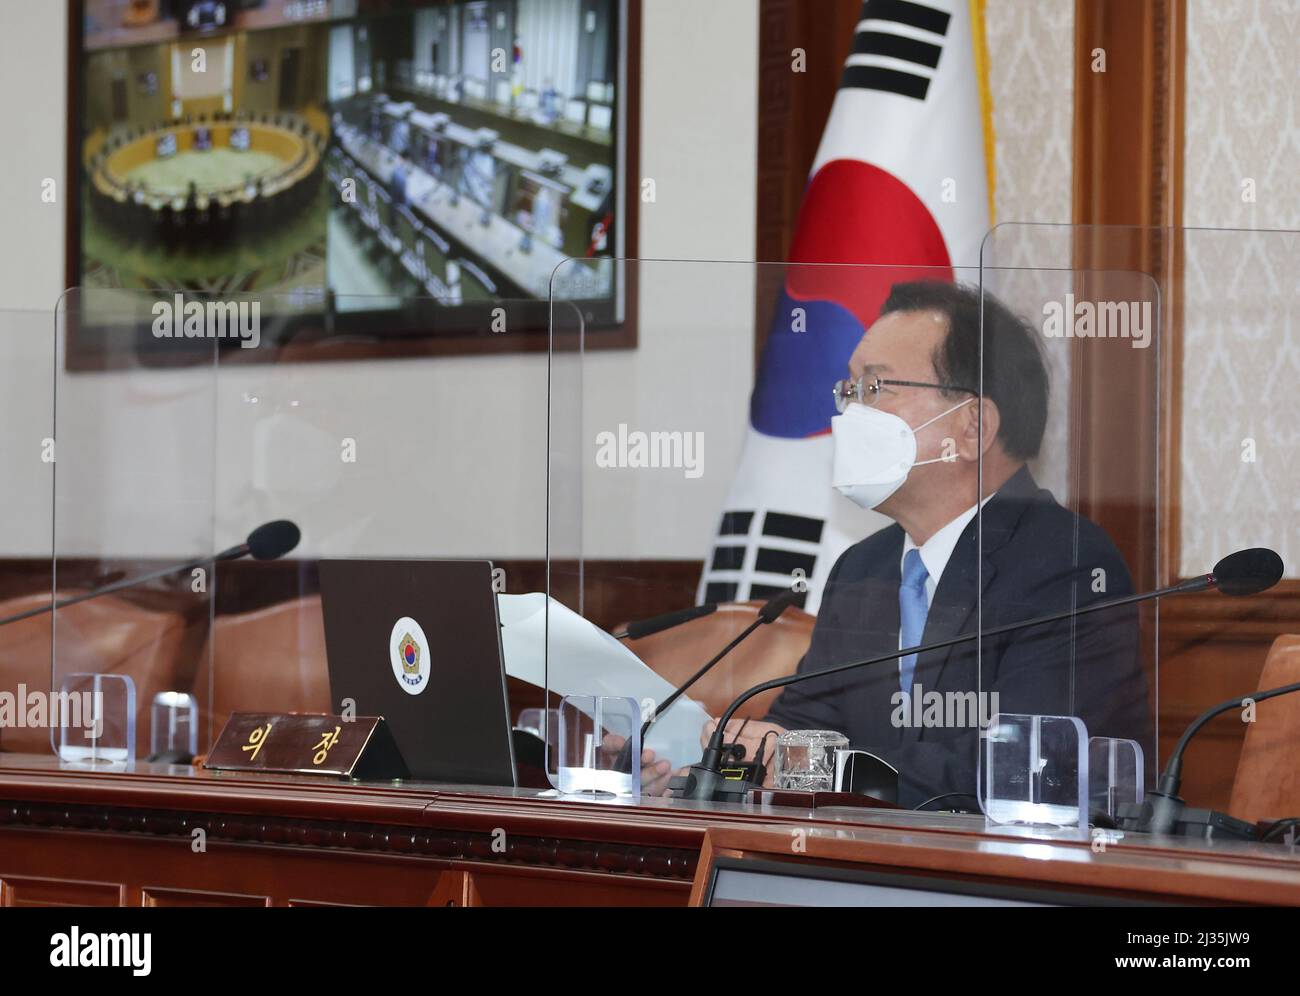 06th Apr, 2022. Fund for relocation of presidential office approved Prime Minister Kim Boo-kyum presides over an emergency Cabinet meeting at the government complex in Seoul on April 6, 2022, to pass a reserve fund worth 36 billion won (US$29.5 million) for the relocation of the presidential office. The move is being pushed by President-elect Yoon Suk-yeol. Credit: Yonhap/Newcom/Alamy Live News Stock Photo